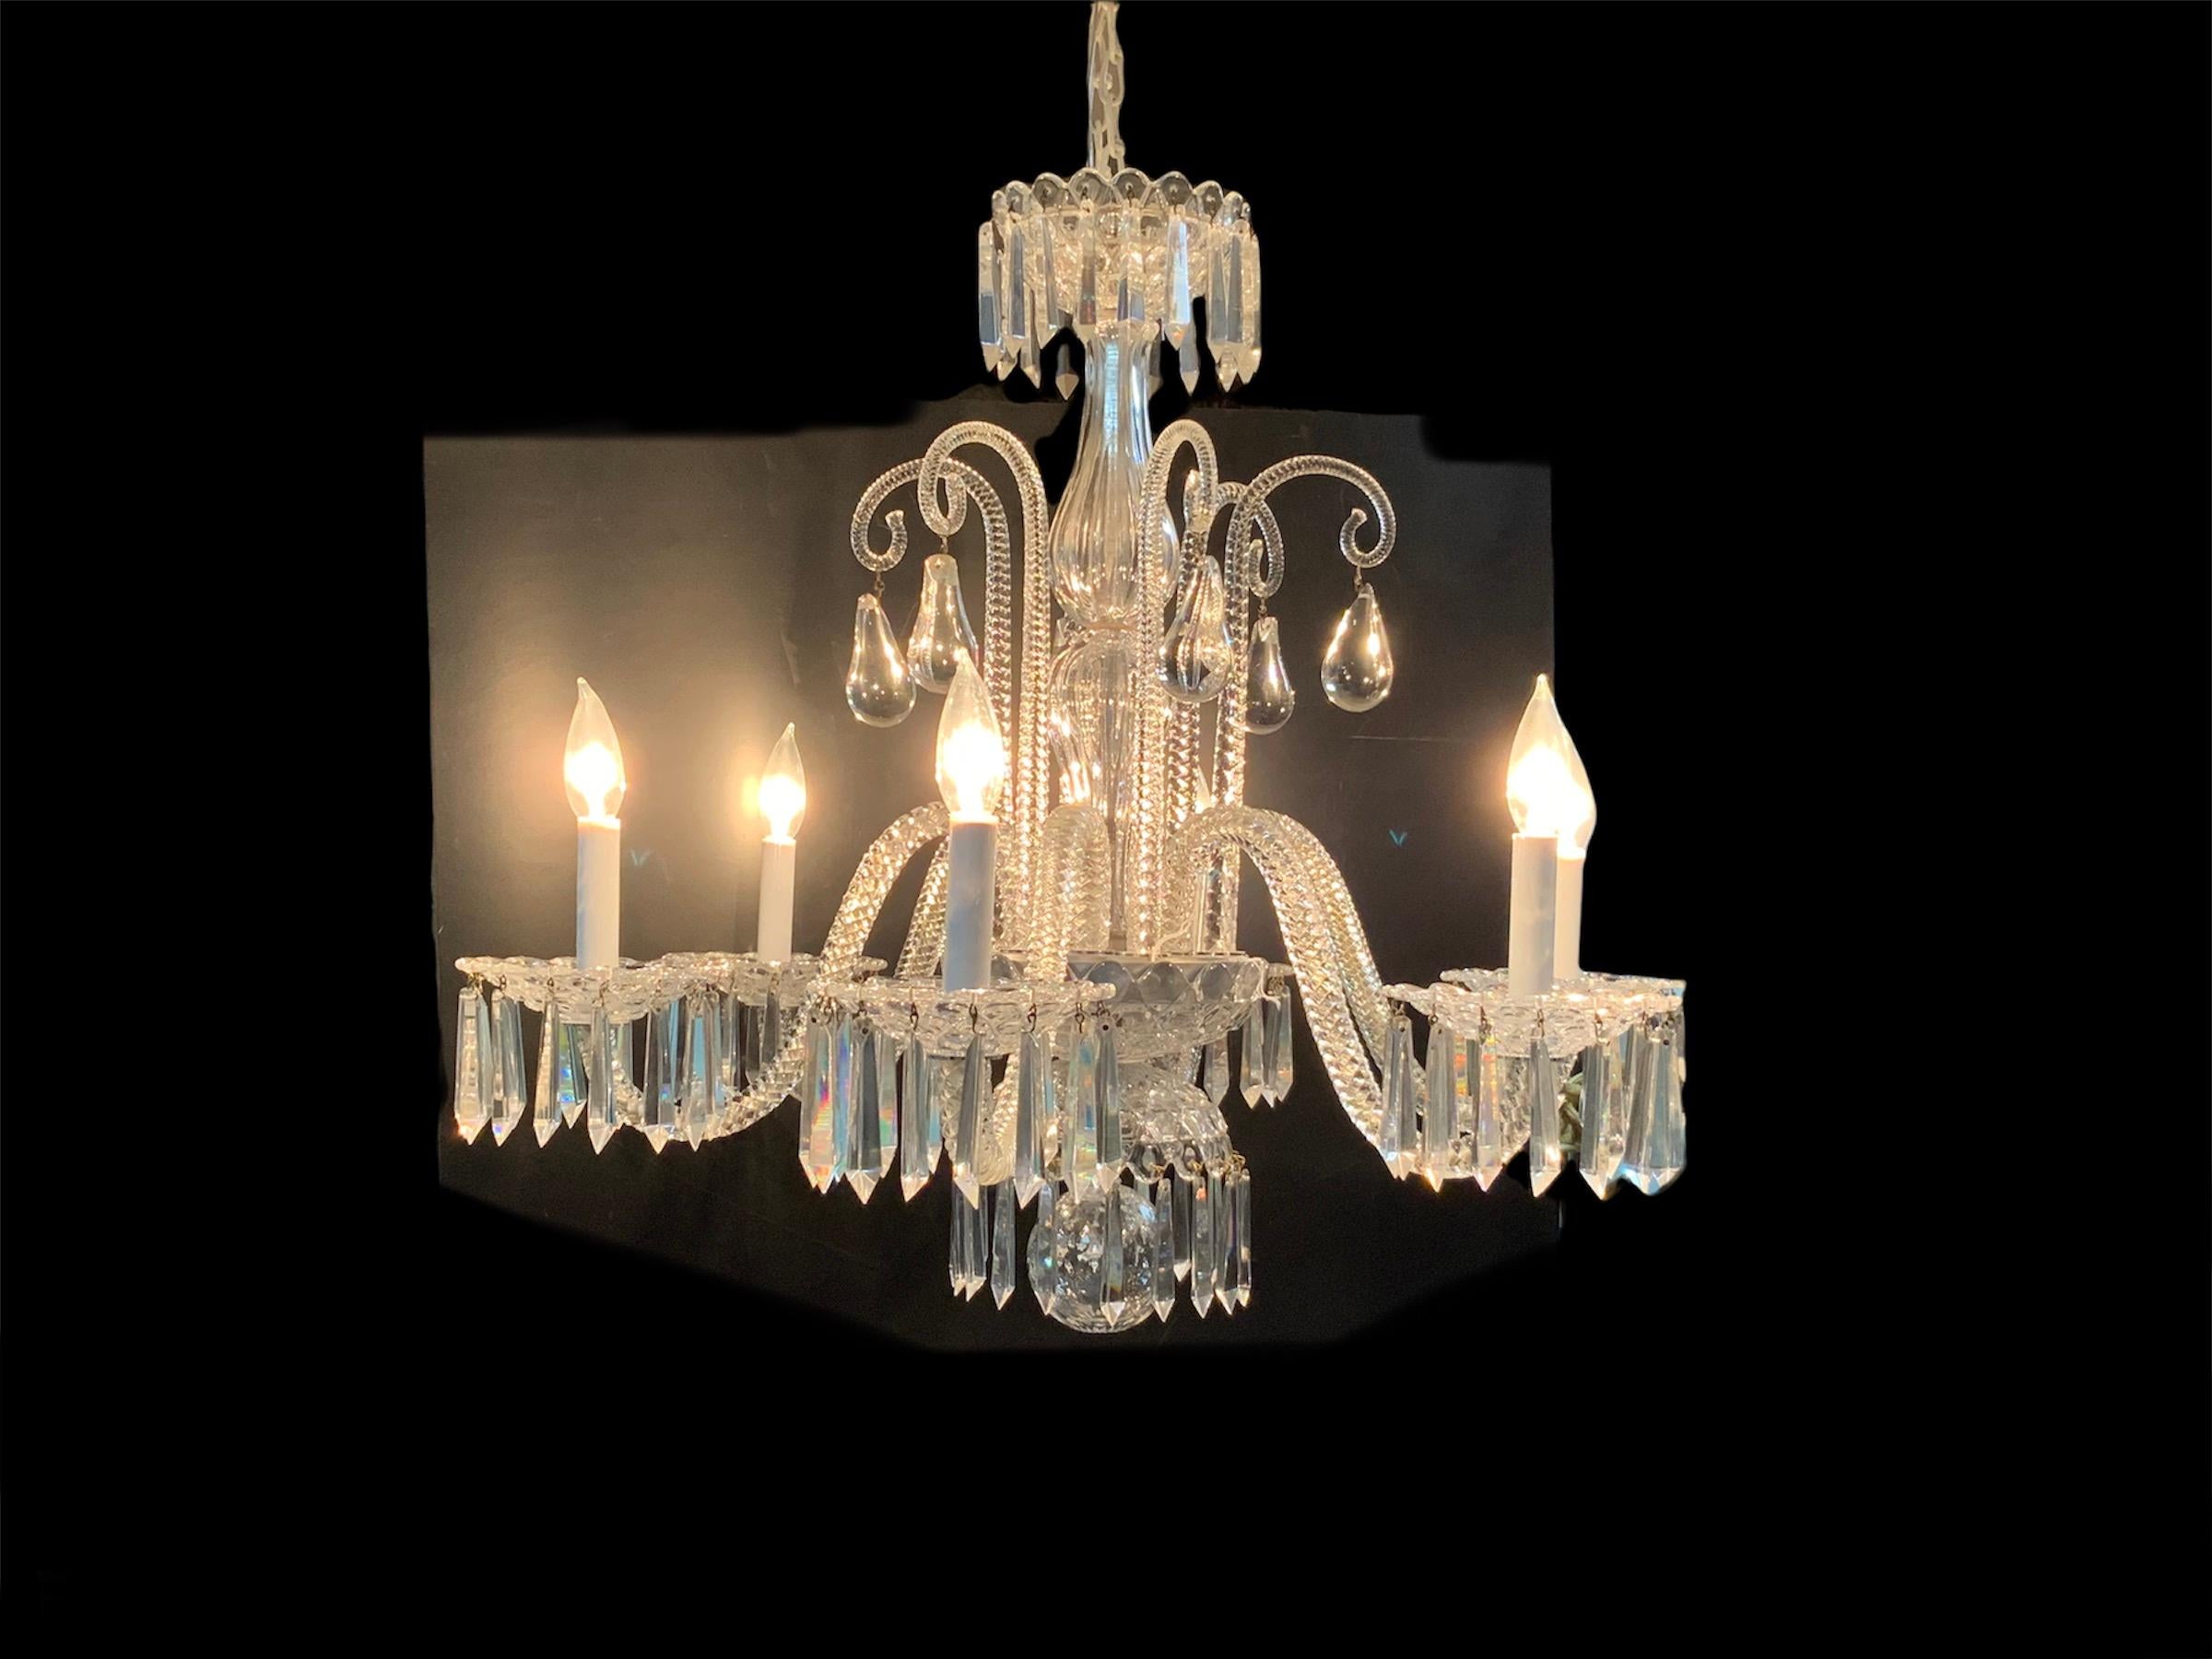 This is a cut crystal chandelier of six arms. Starting at the top, it depicts a canopy with multiple embossed hexagons shaped cut. From there come down a column formed by two fluted crystal urns that ends with a bowl with the same pattern of the